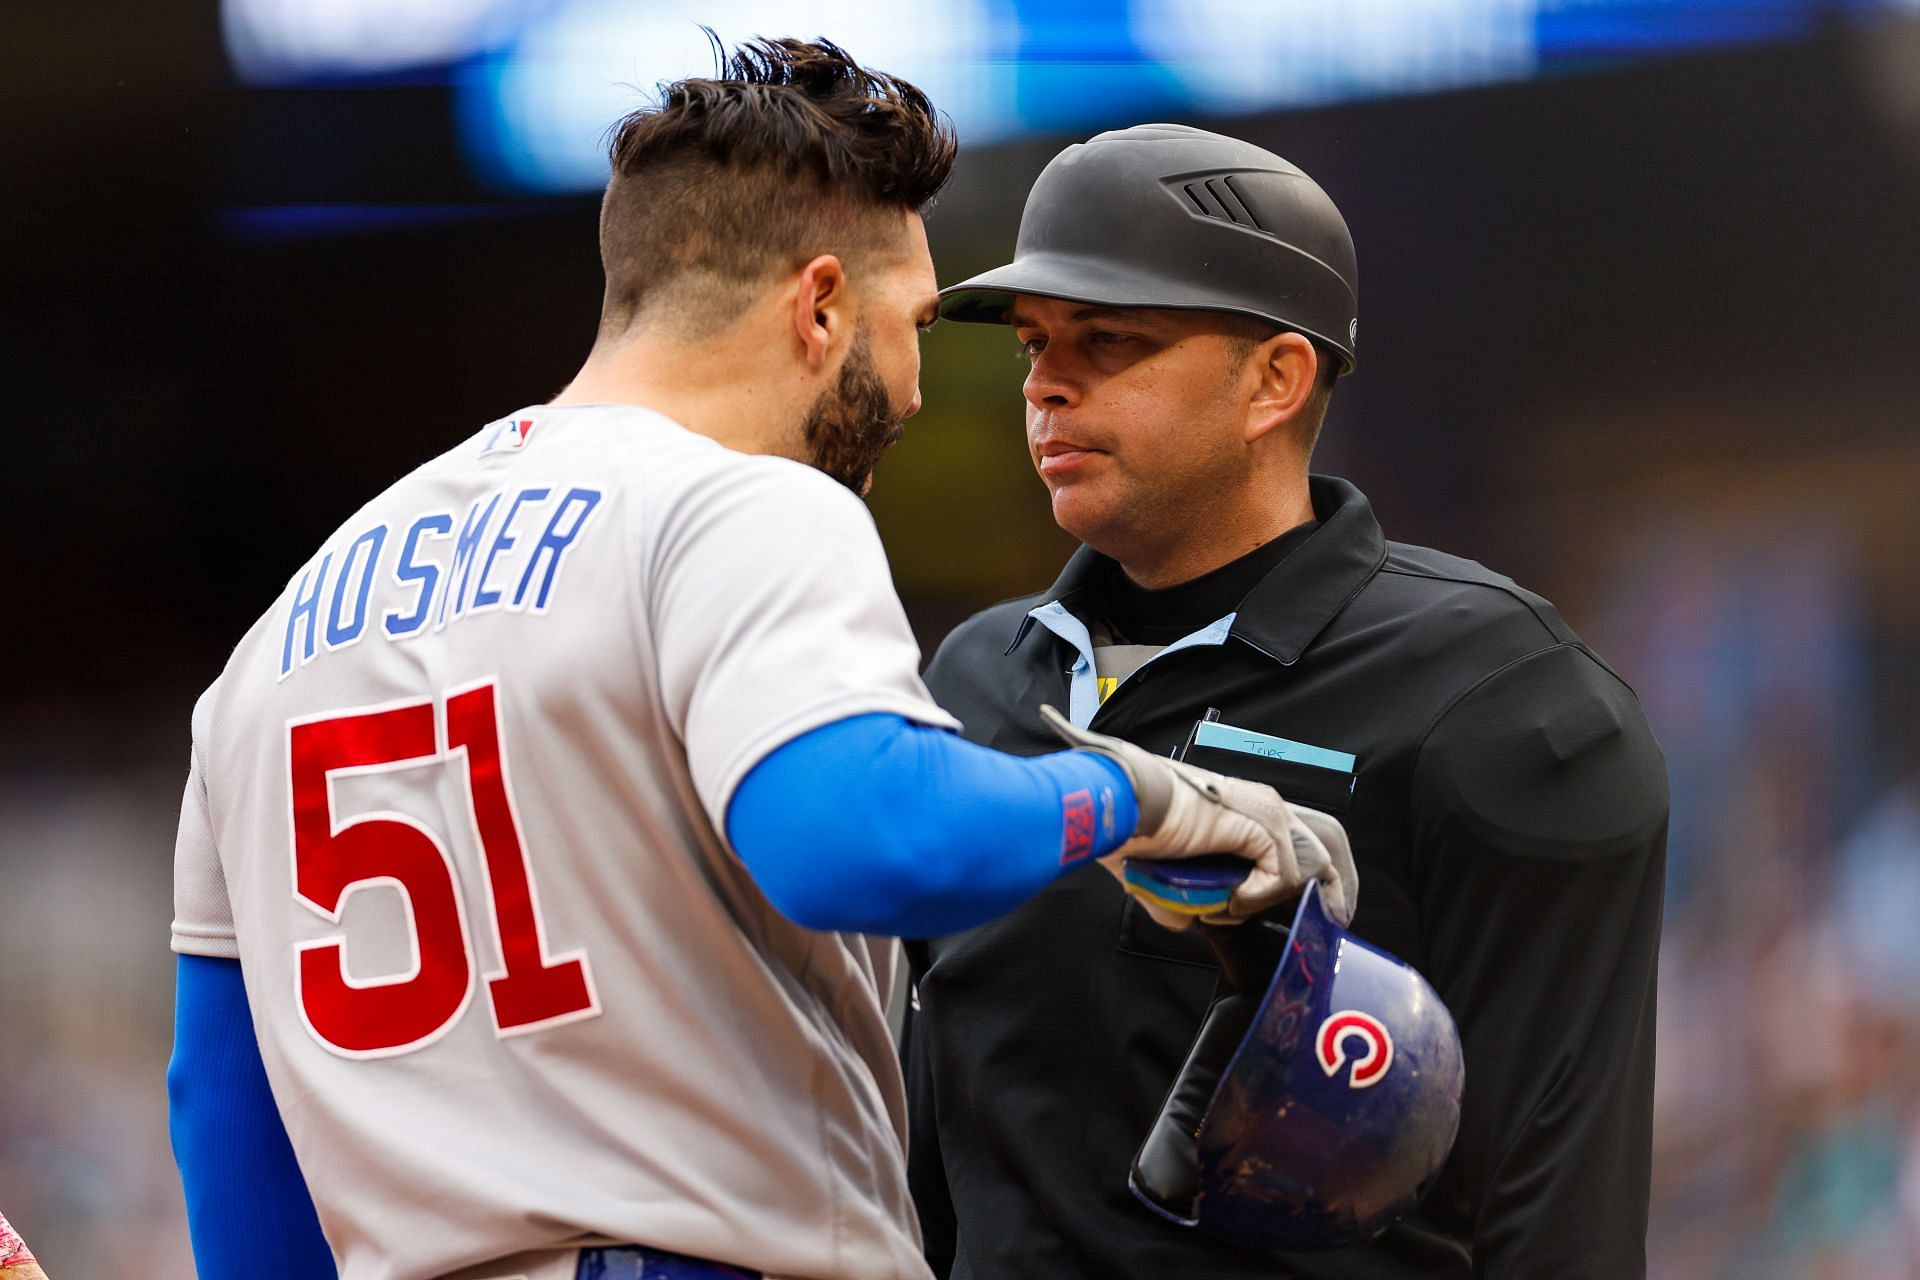 MLB fans react to Chicago Cubs designating Eric Hosmer for